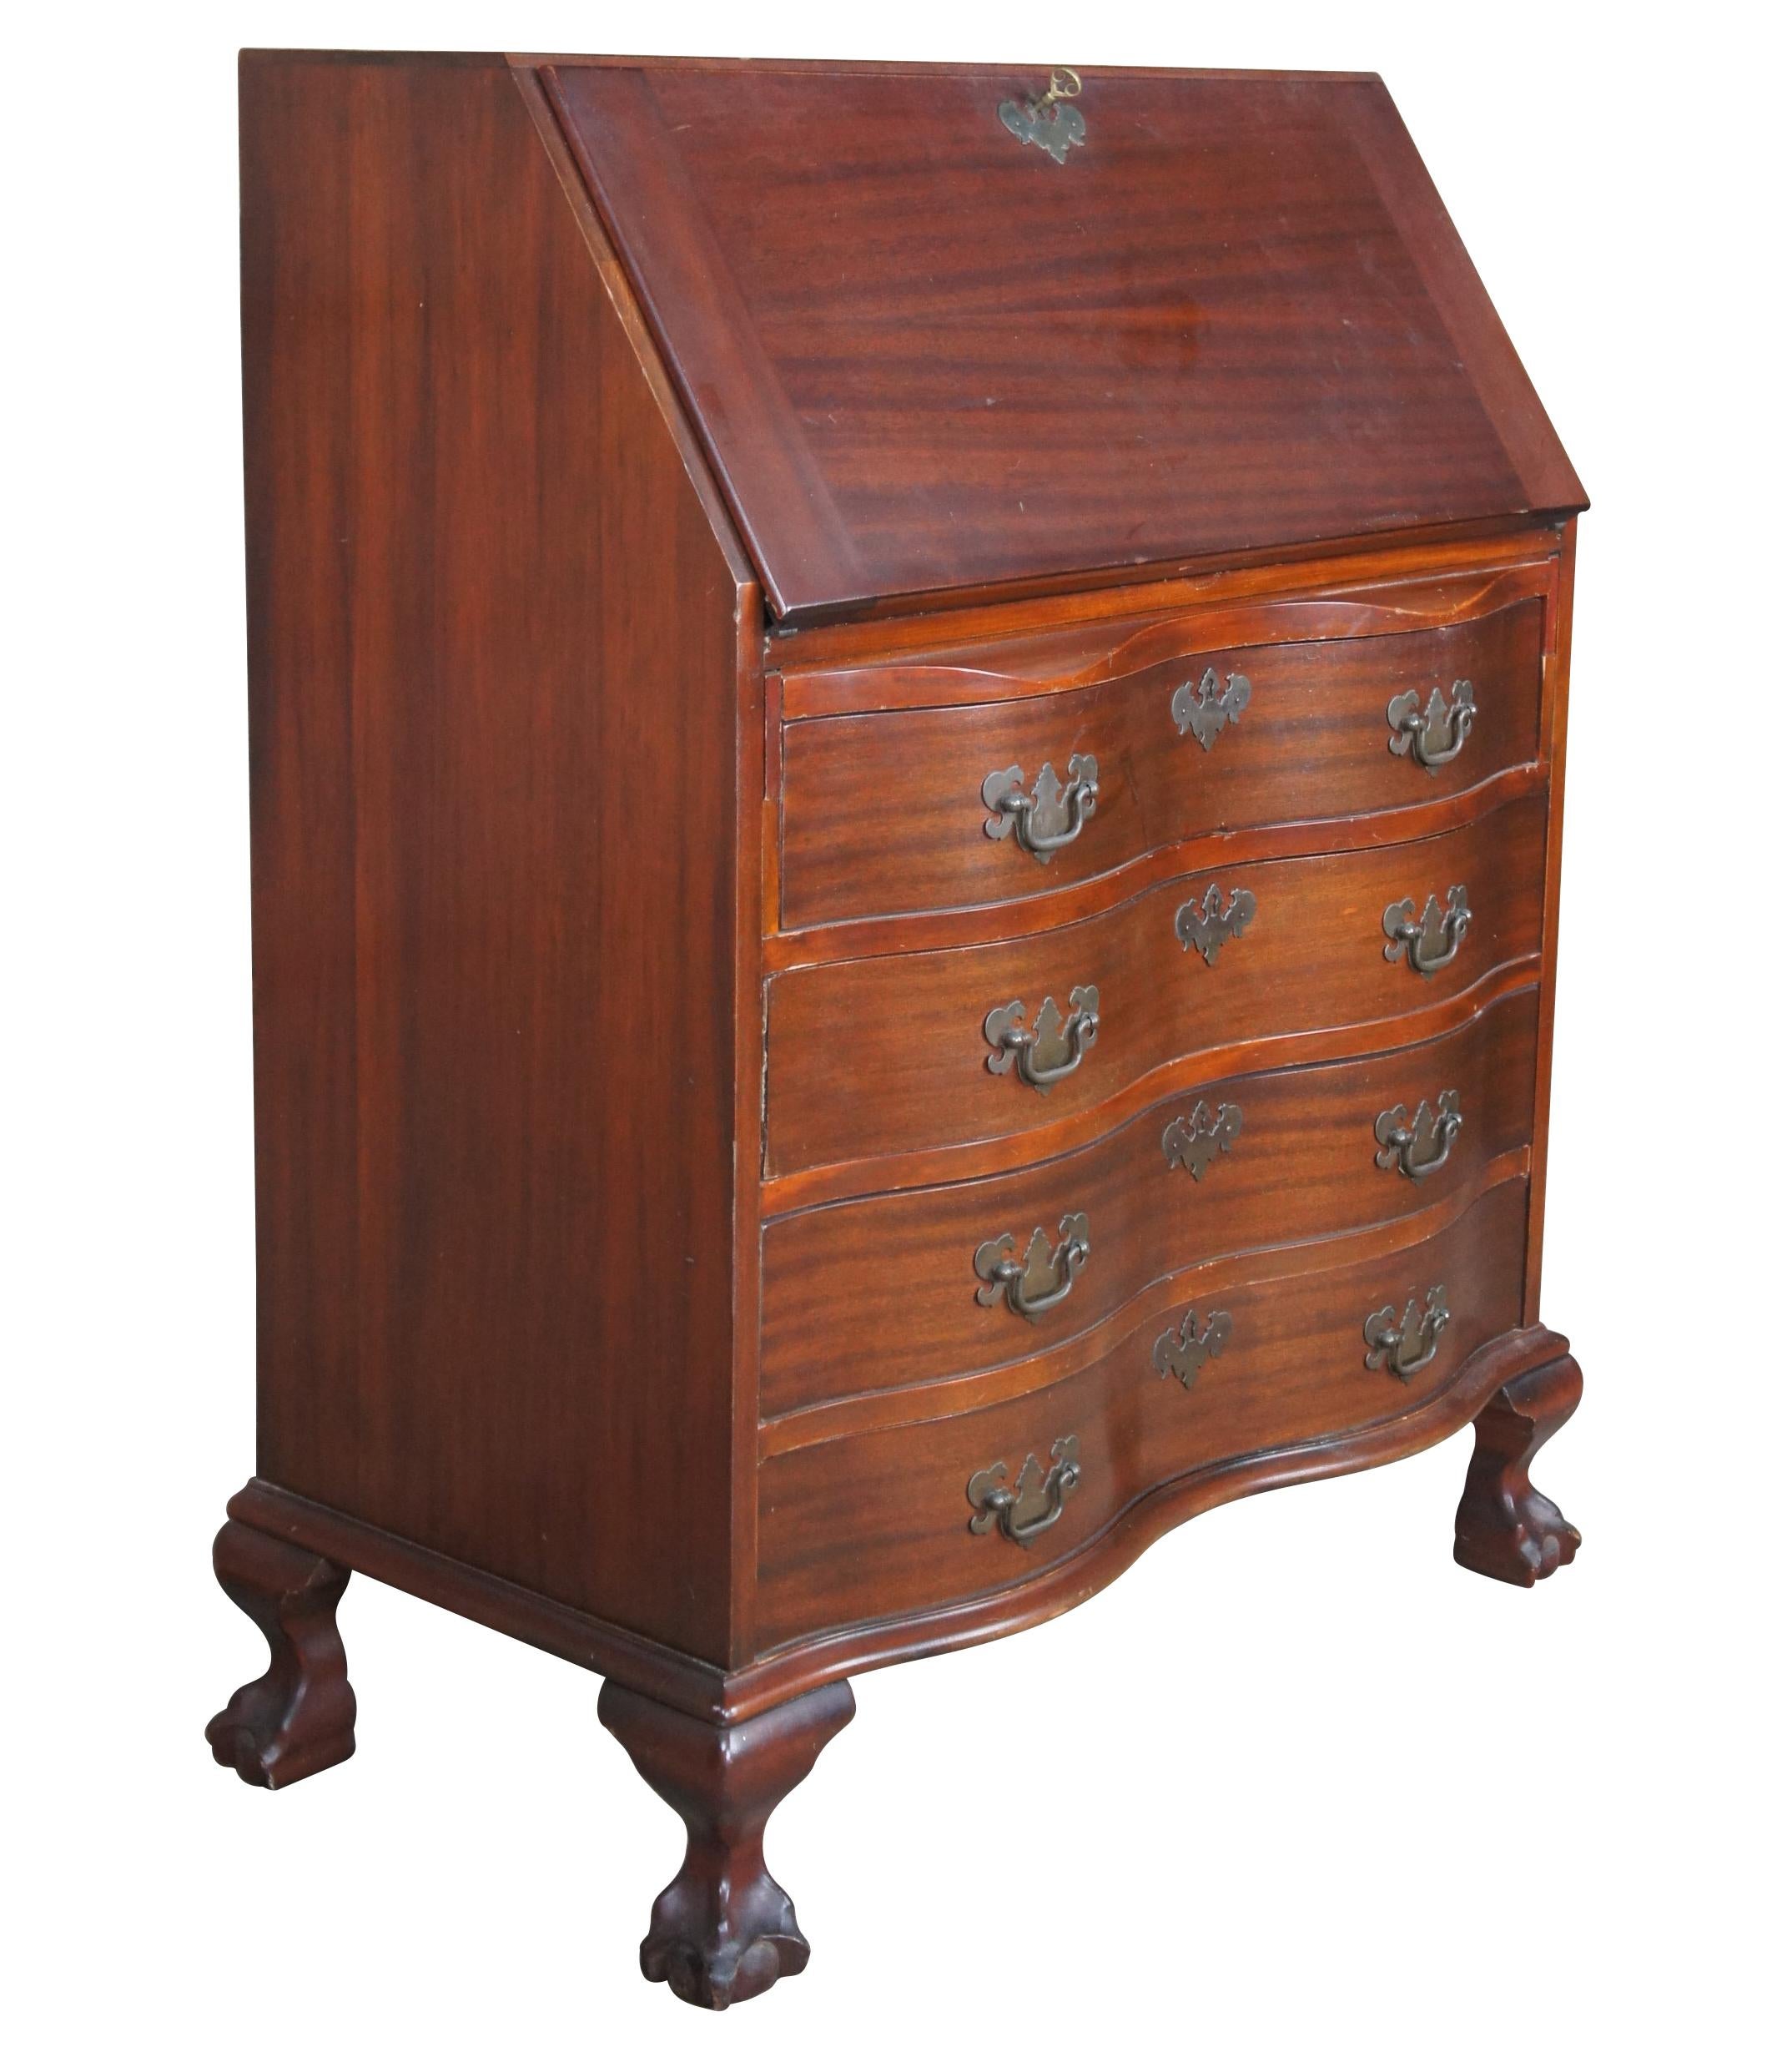 Antique Chippendale secretary or writing desk. Made of mahogany featuring serpentine form with drop front writing surface that opens to multiple drawers and cubbies, over four oxbow drawers that are mounted with Federal brass pulls, and supported by